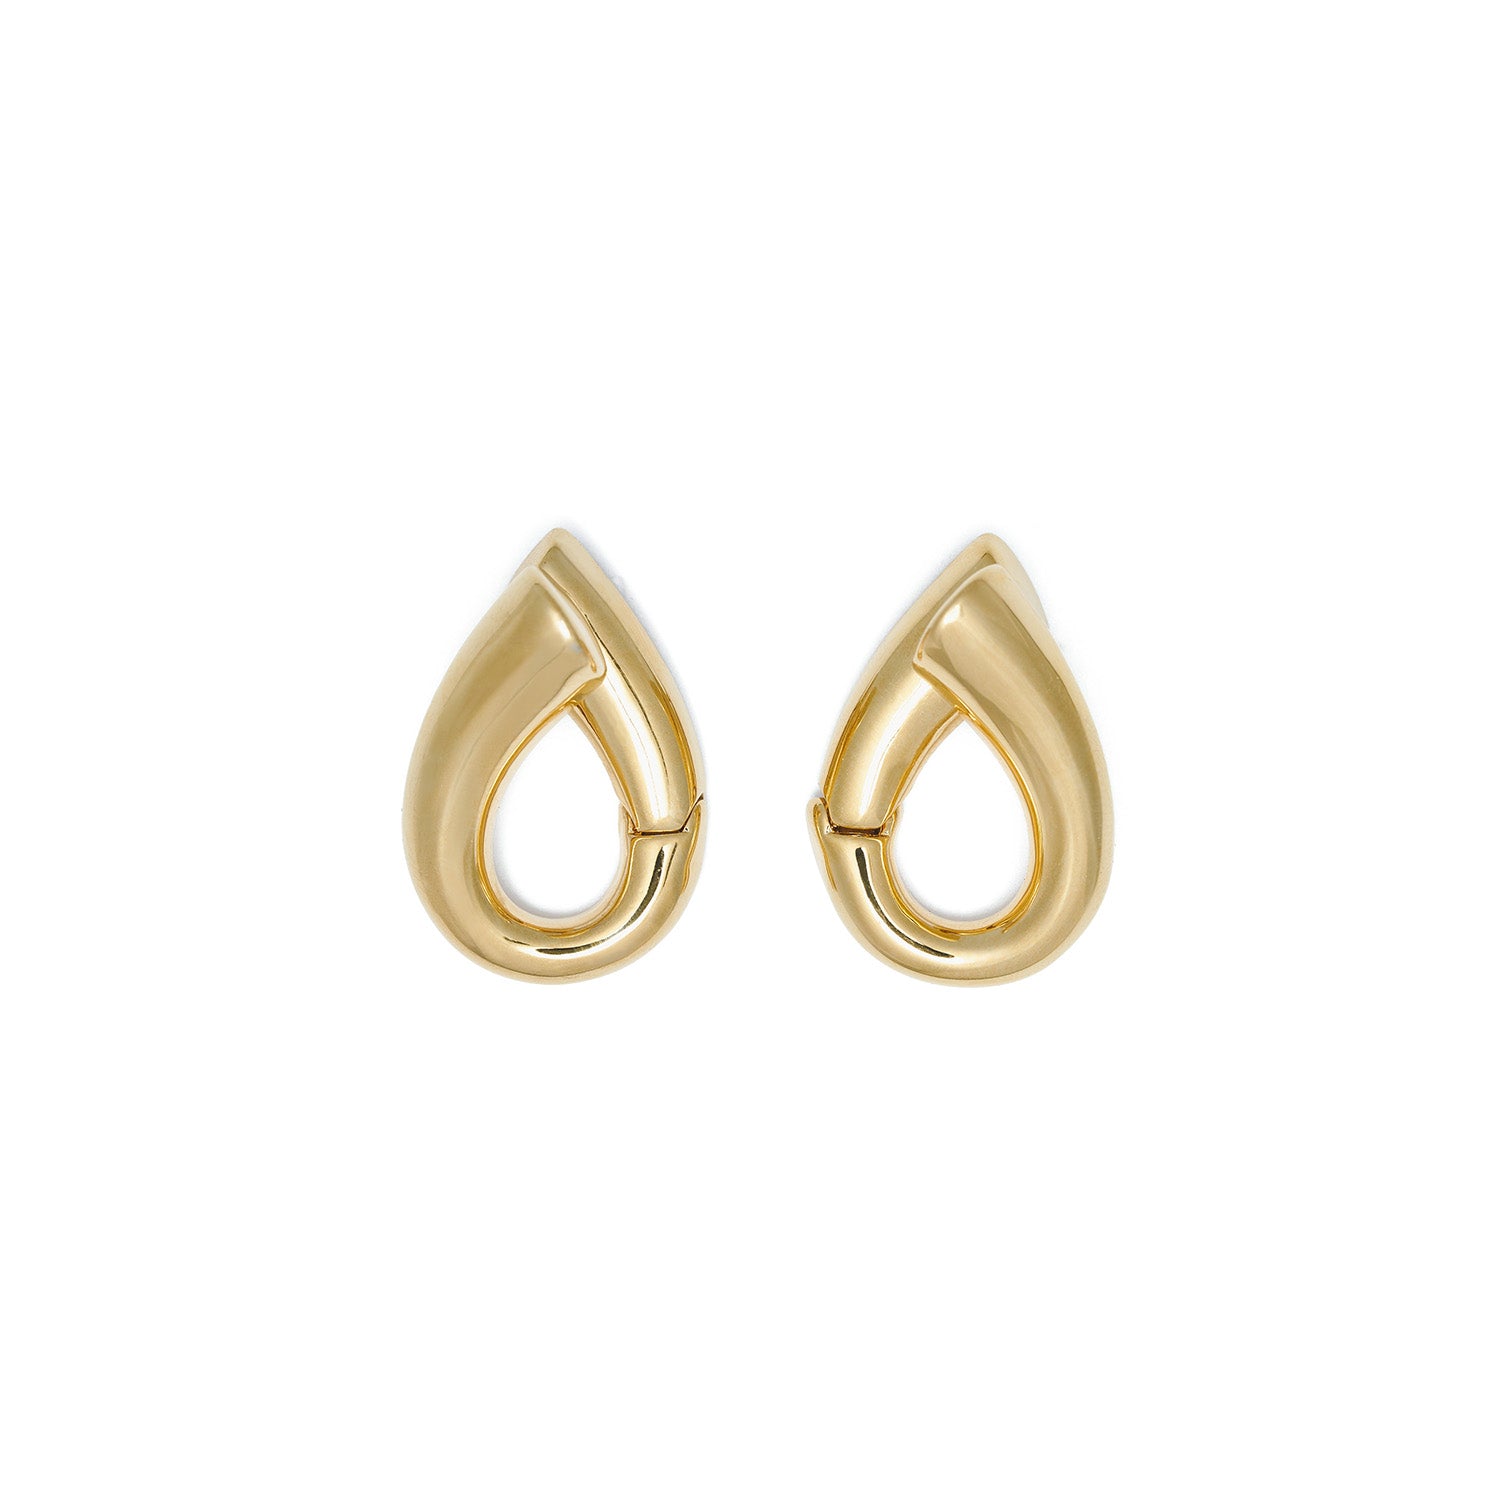 Discover 173+ infinity earrings gold